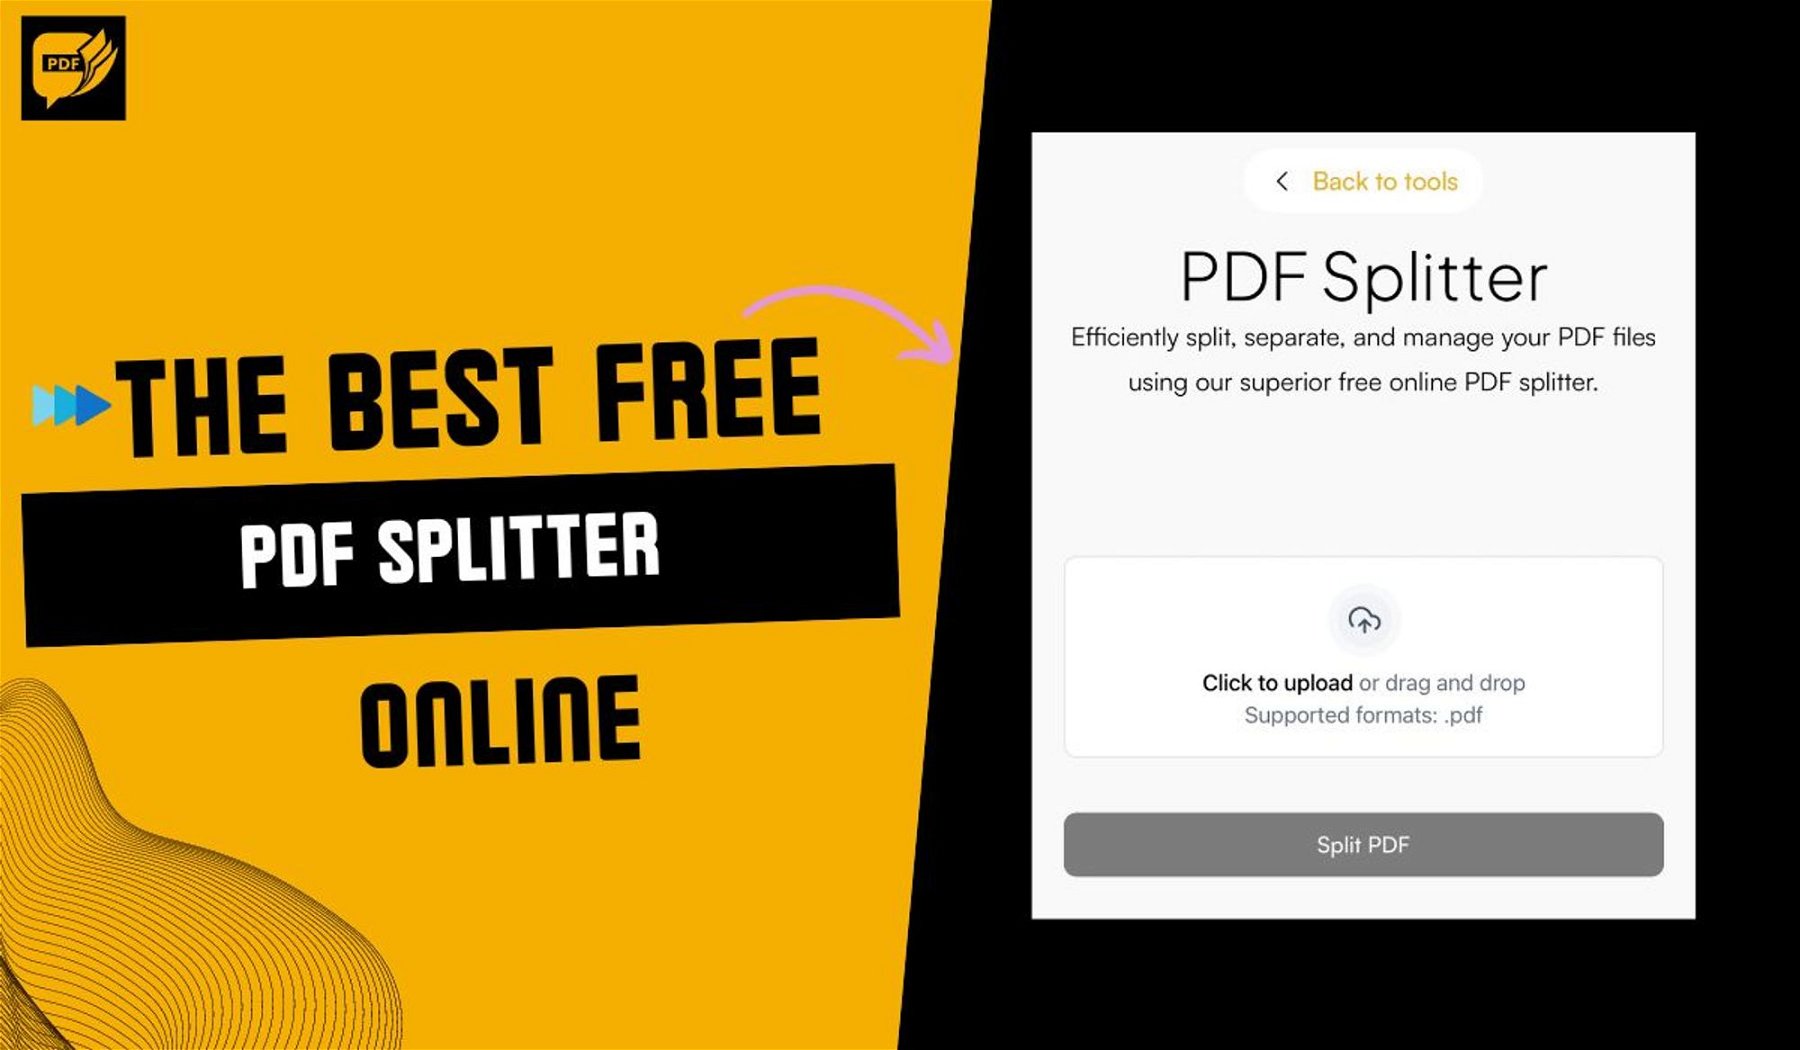 Split PDF  Separate PDF pages with PDF Cutter online